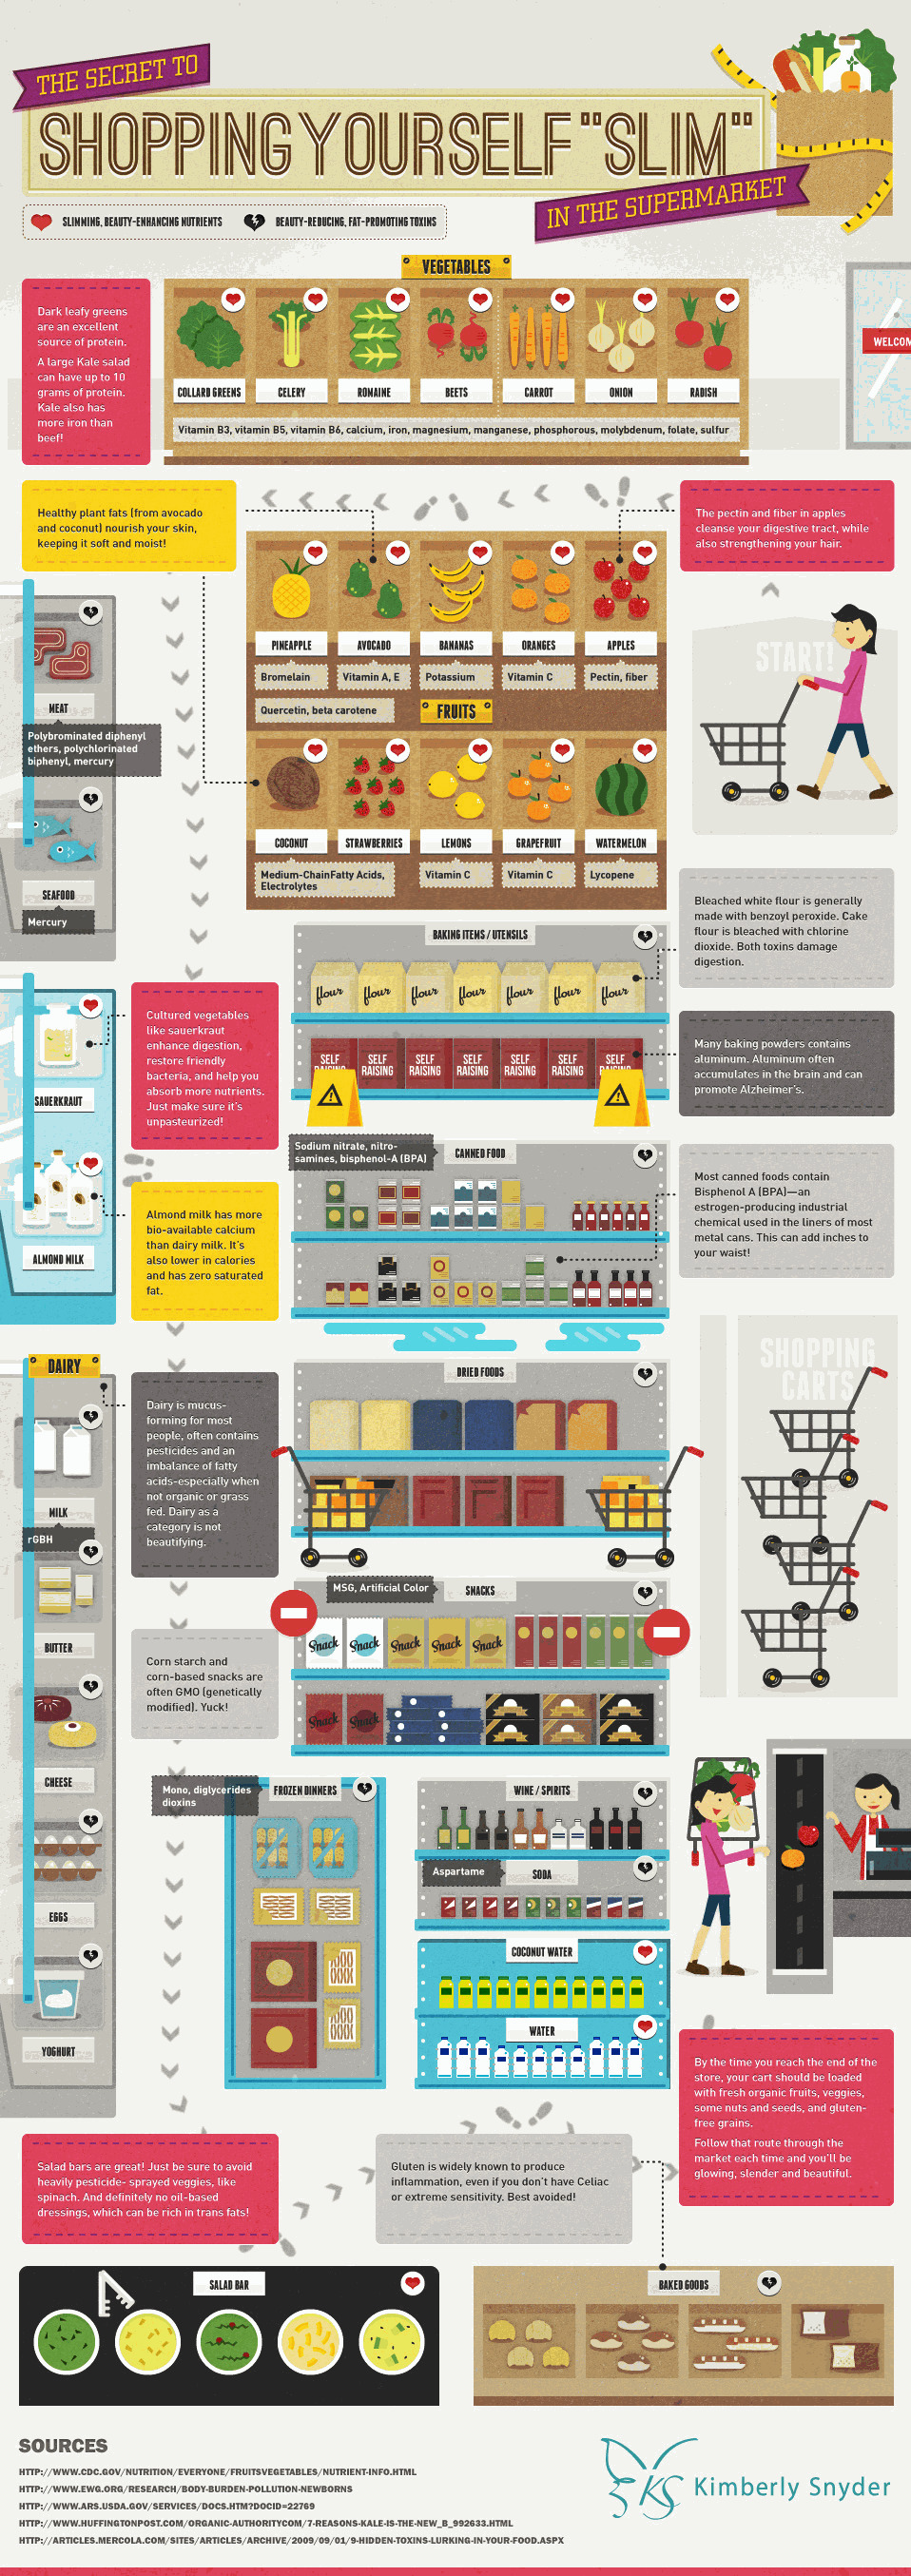 Shopping yourself slim infographic